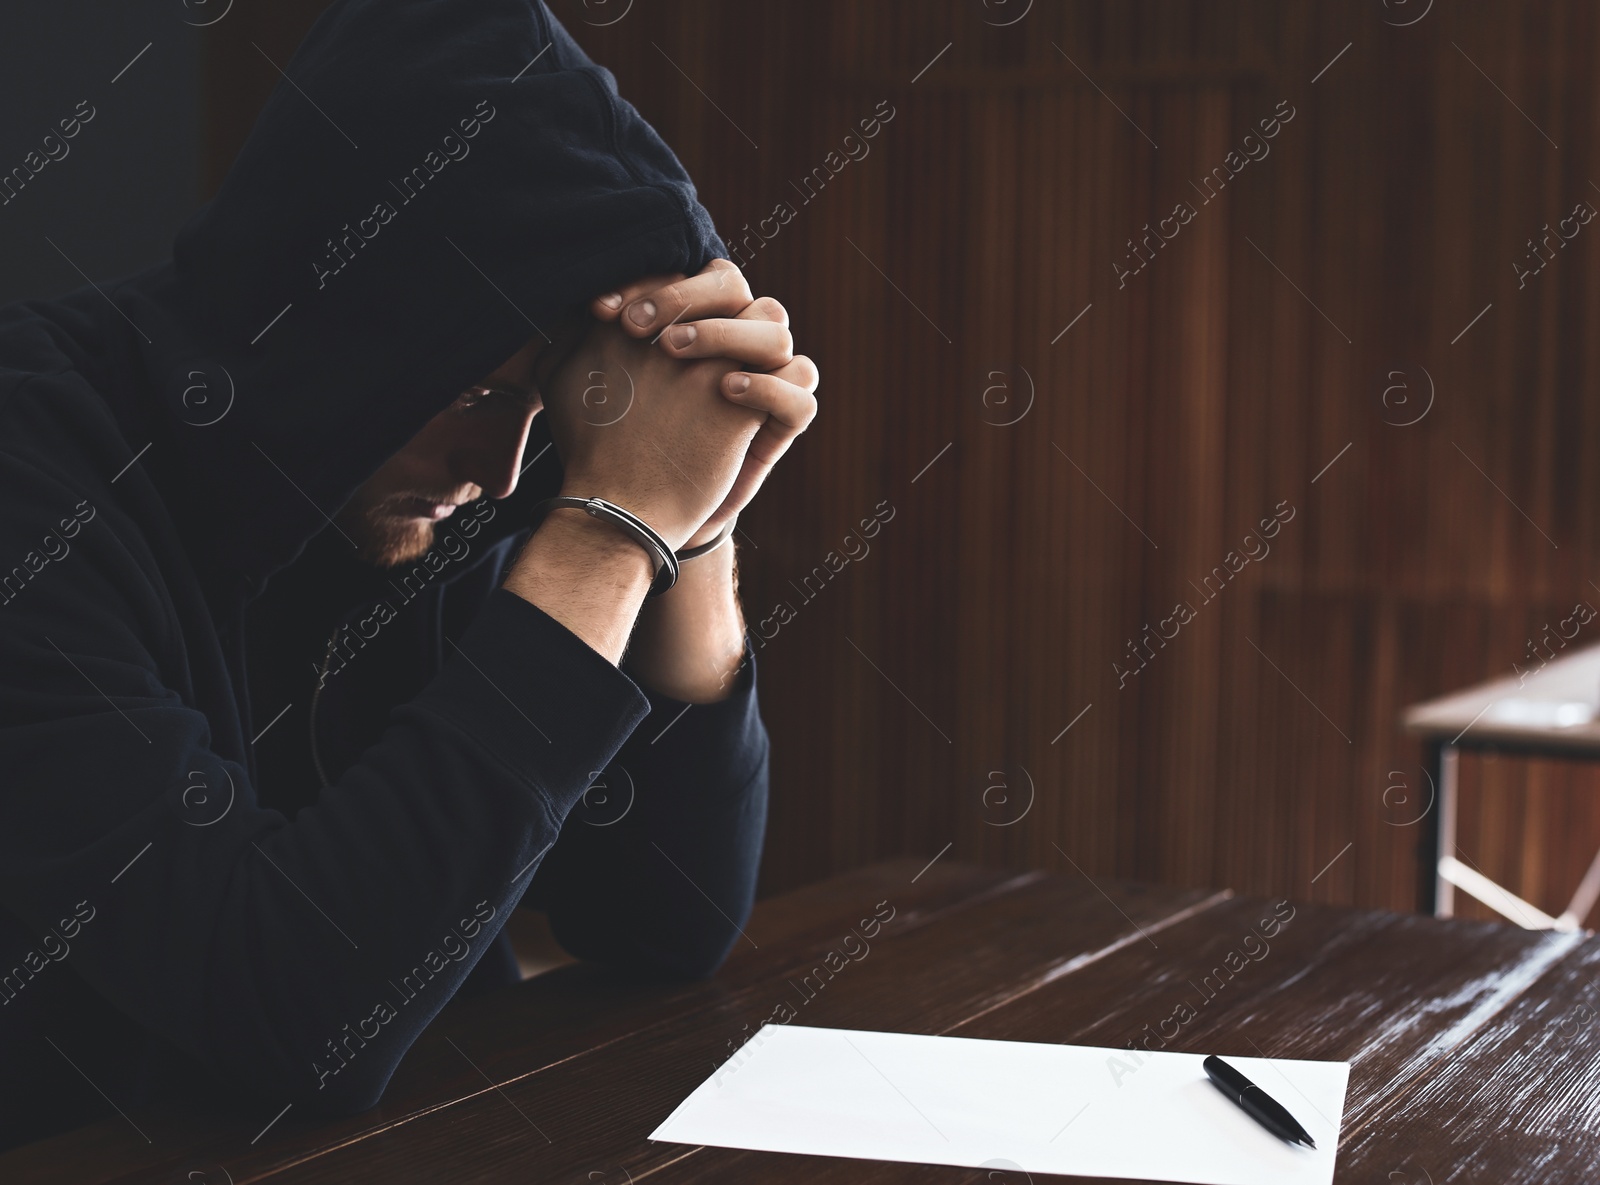 Photo of Criminal in handcuffs with confession at desk indoors. Space for text